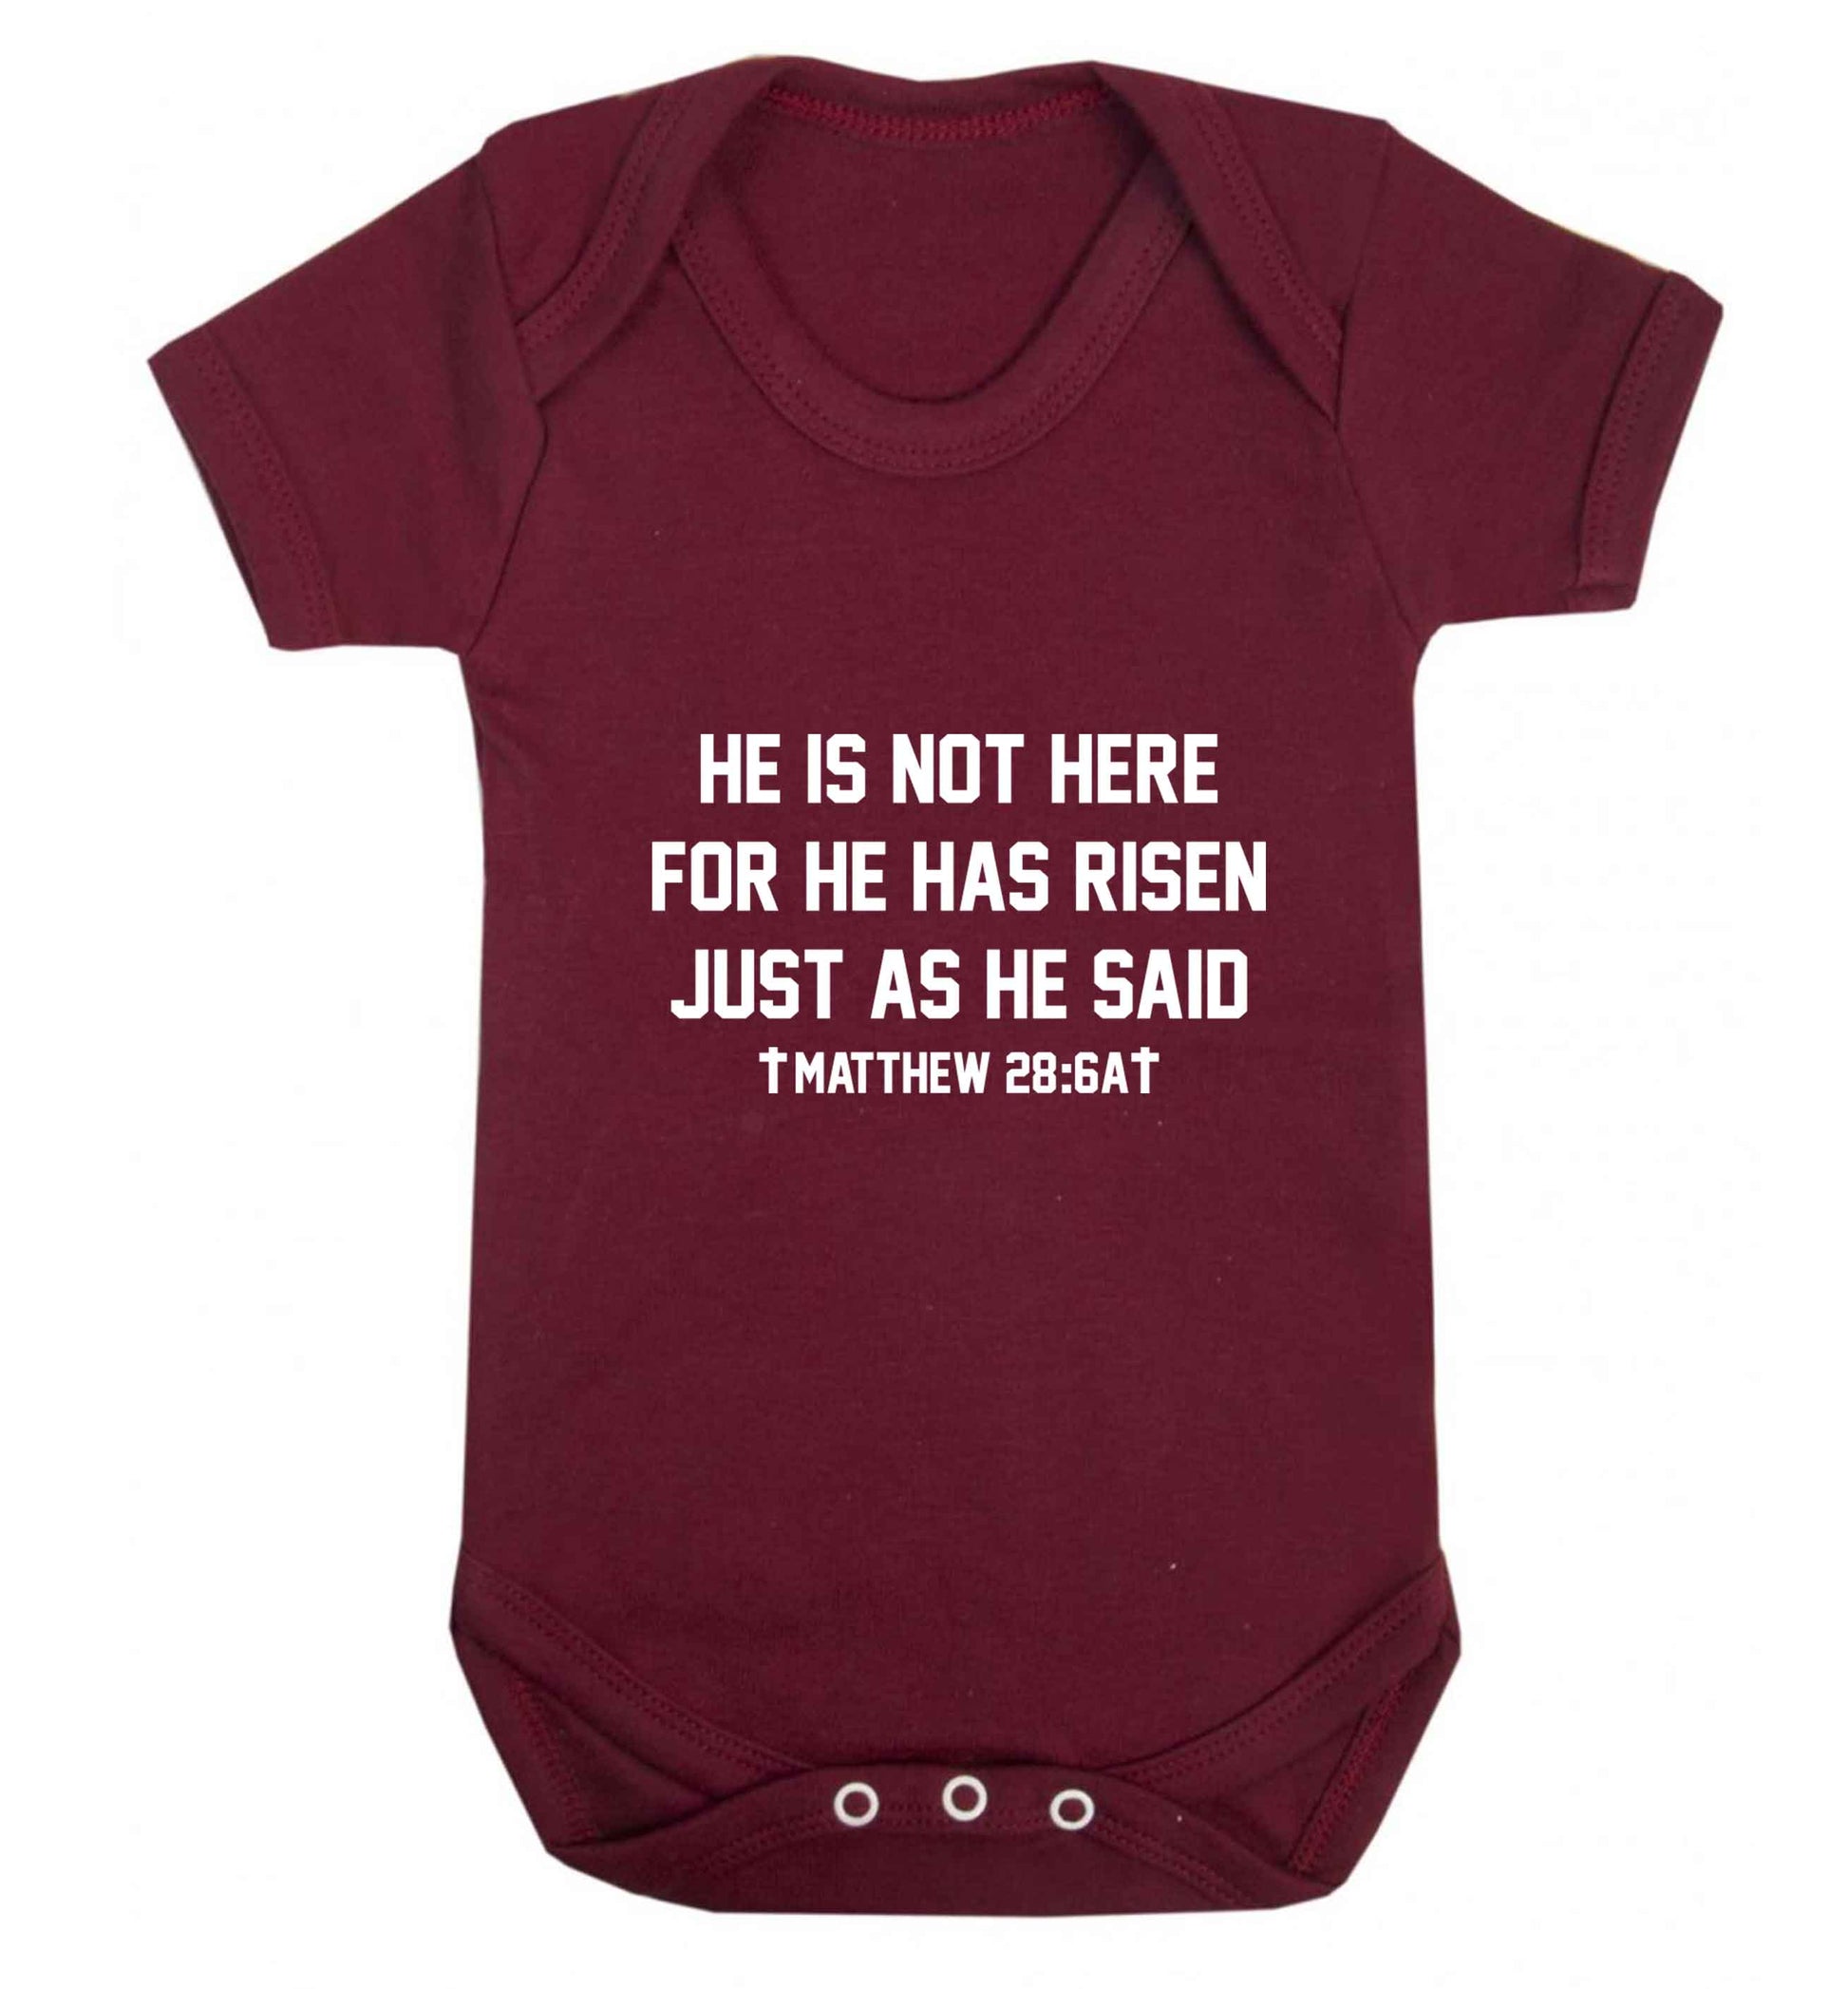 He is not here for he has risen just as he said matthew 28:6A baby vest maroon 18-24 months